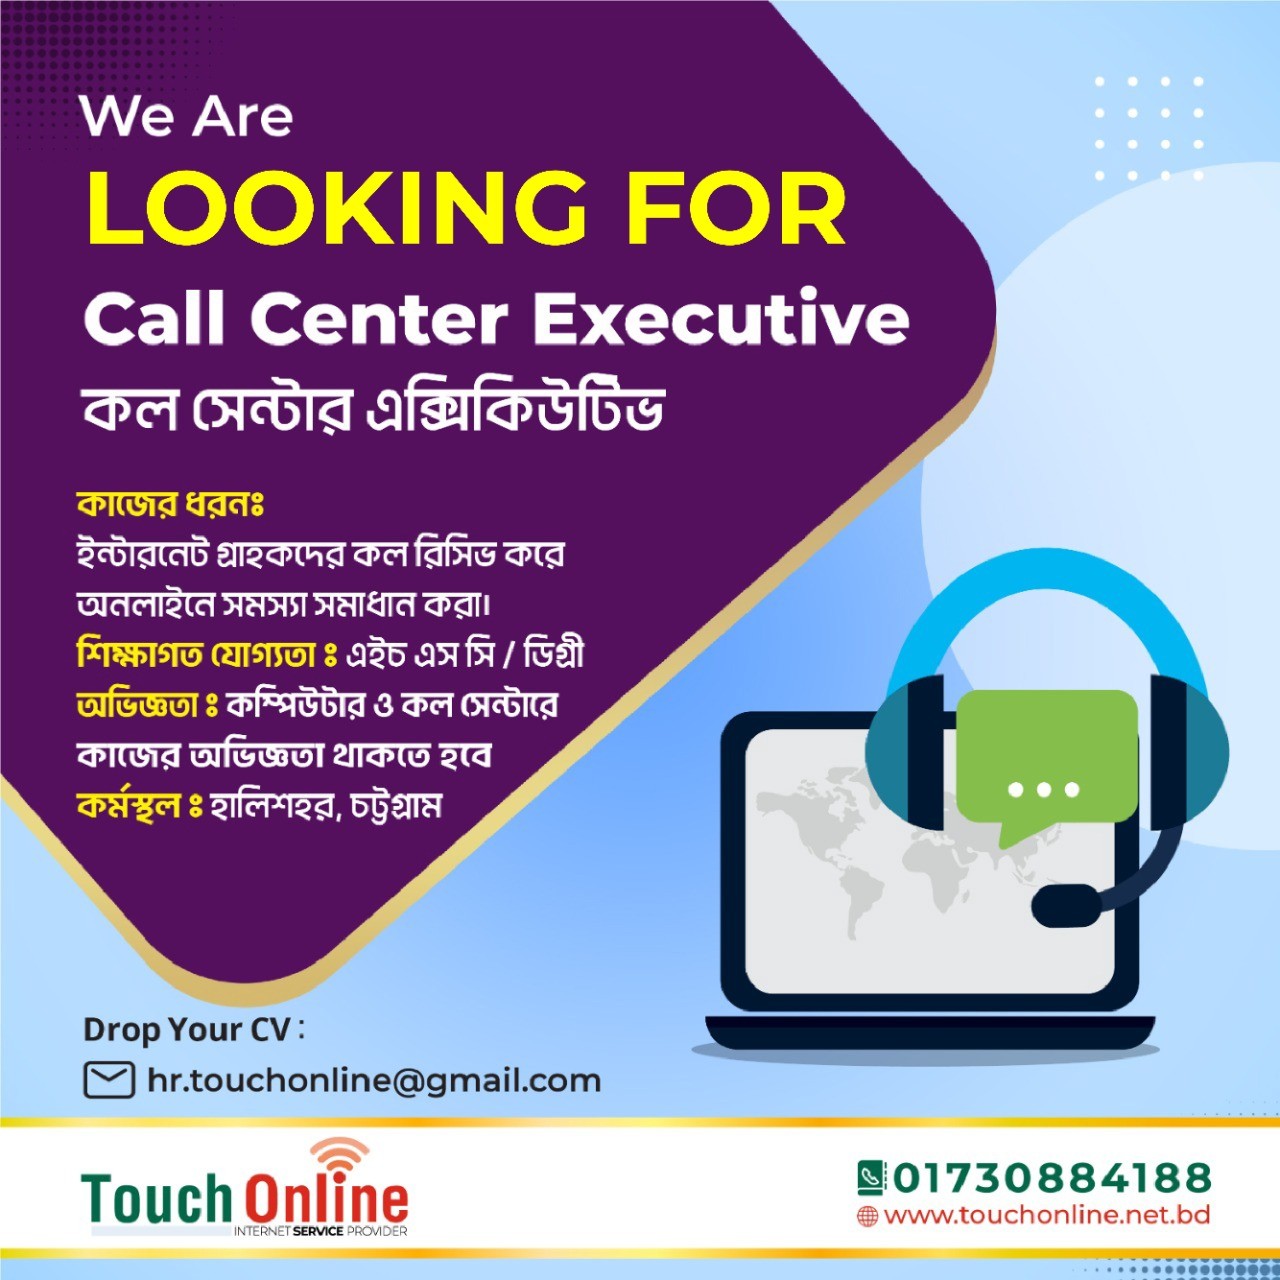 touch_online_best_internet_service_provider_(isp)_in_halishahar_chittagong_looking_for_call_center_executive_02